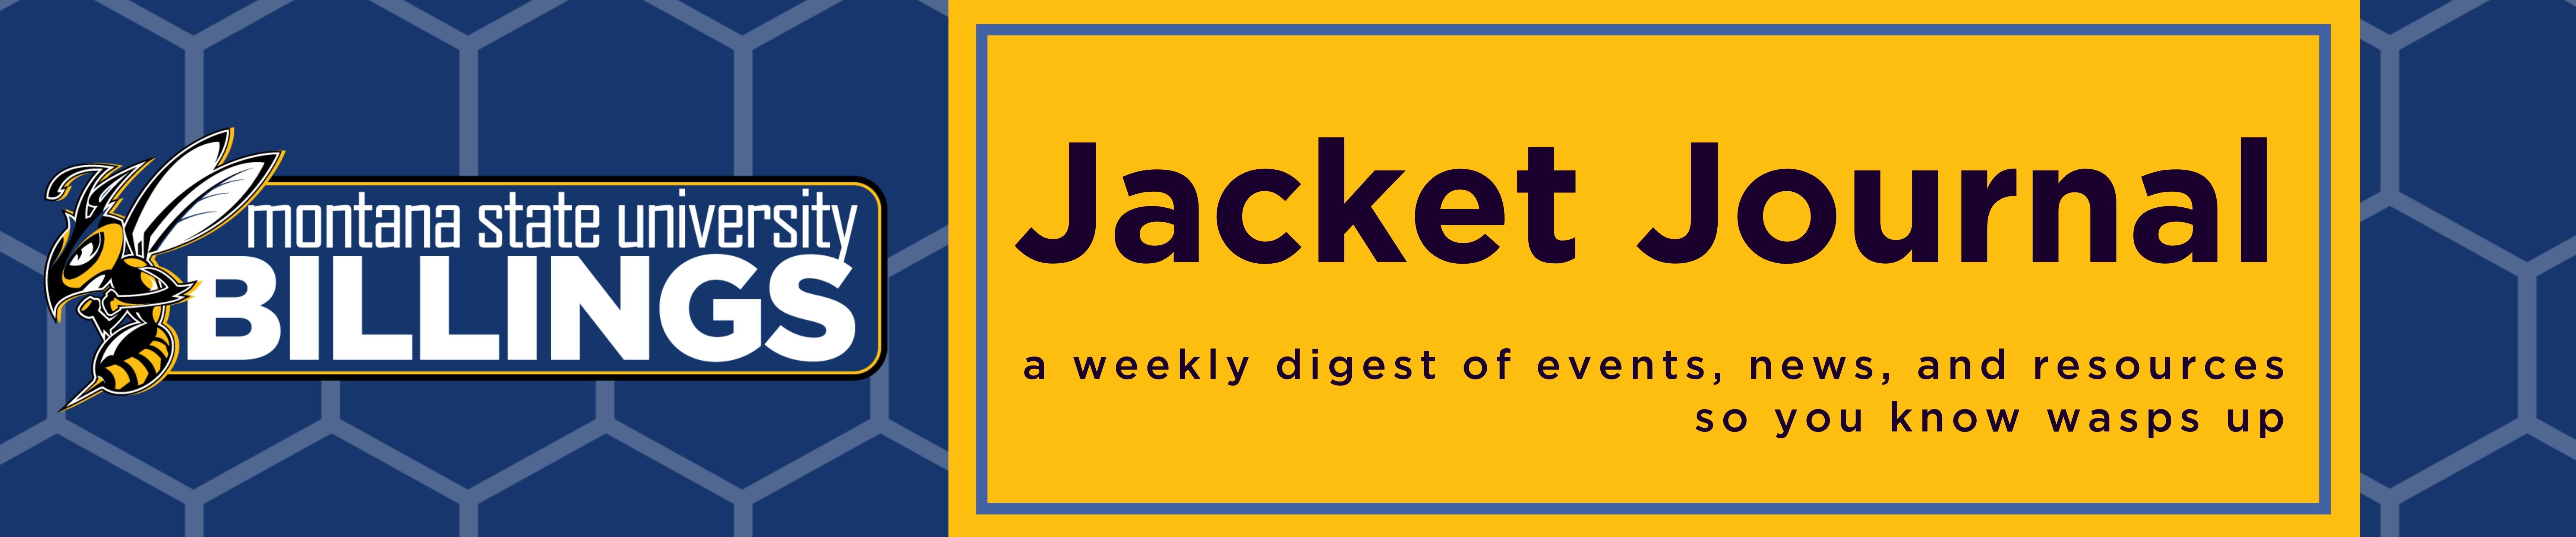 Jacket Journal. A weekly digest of events, news, and resources so you know wasps up.